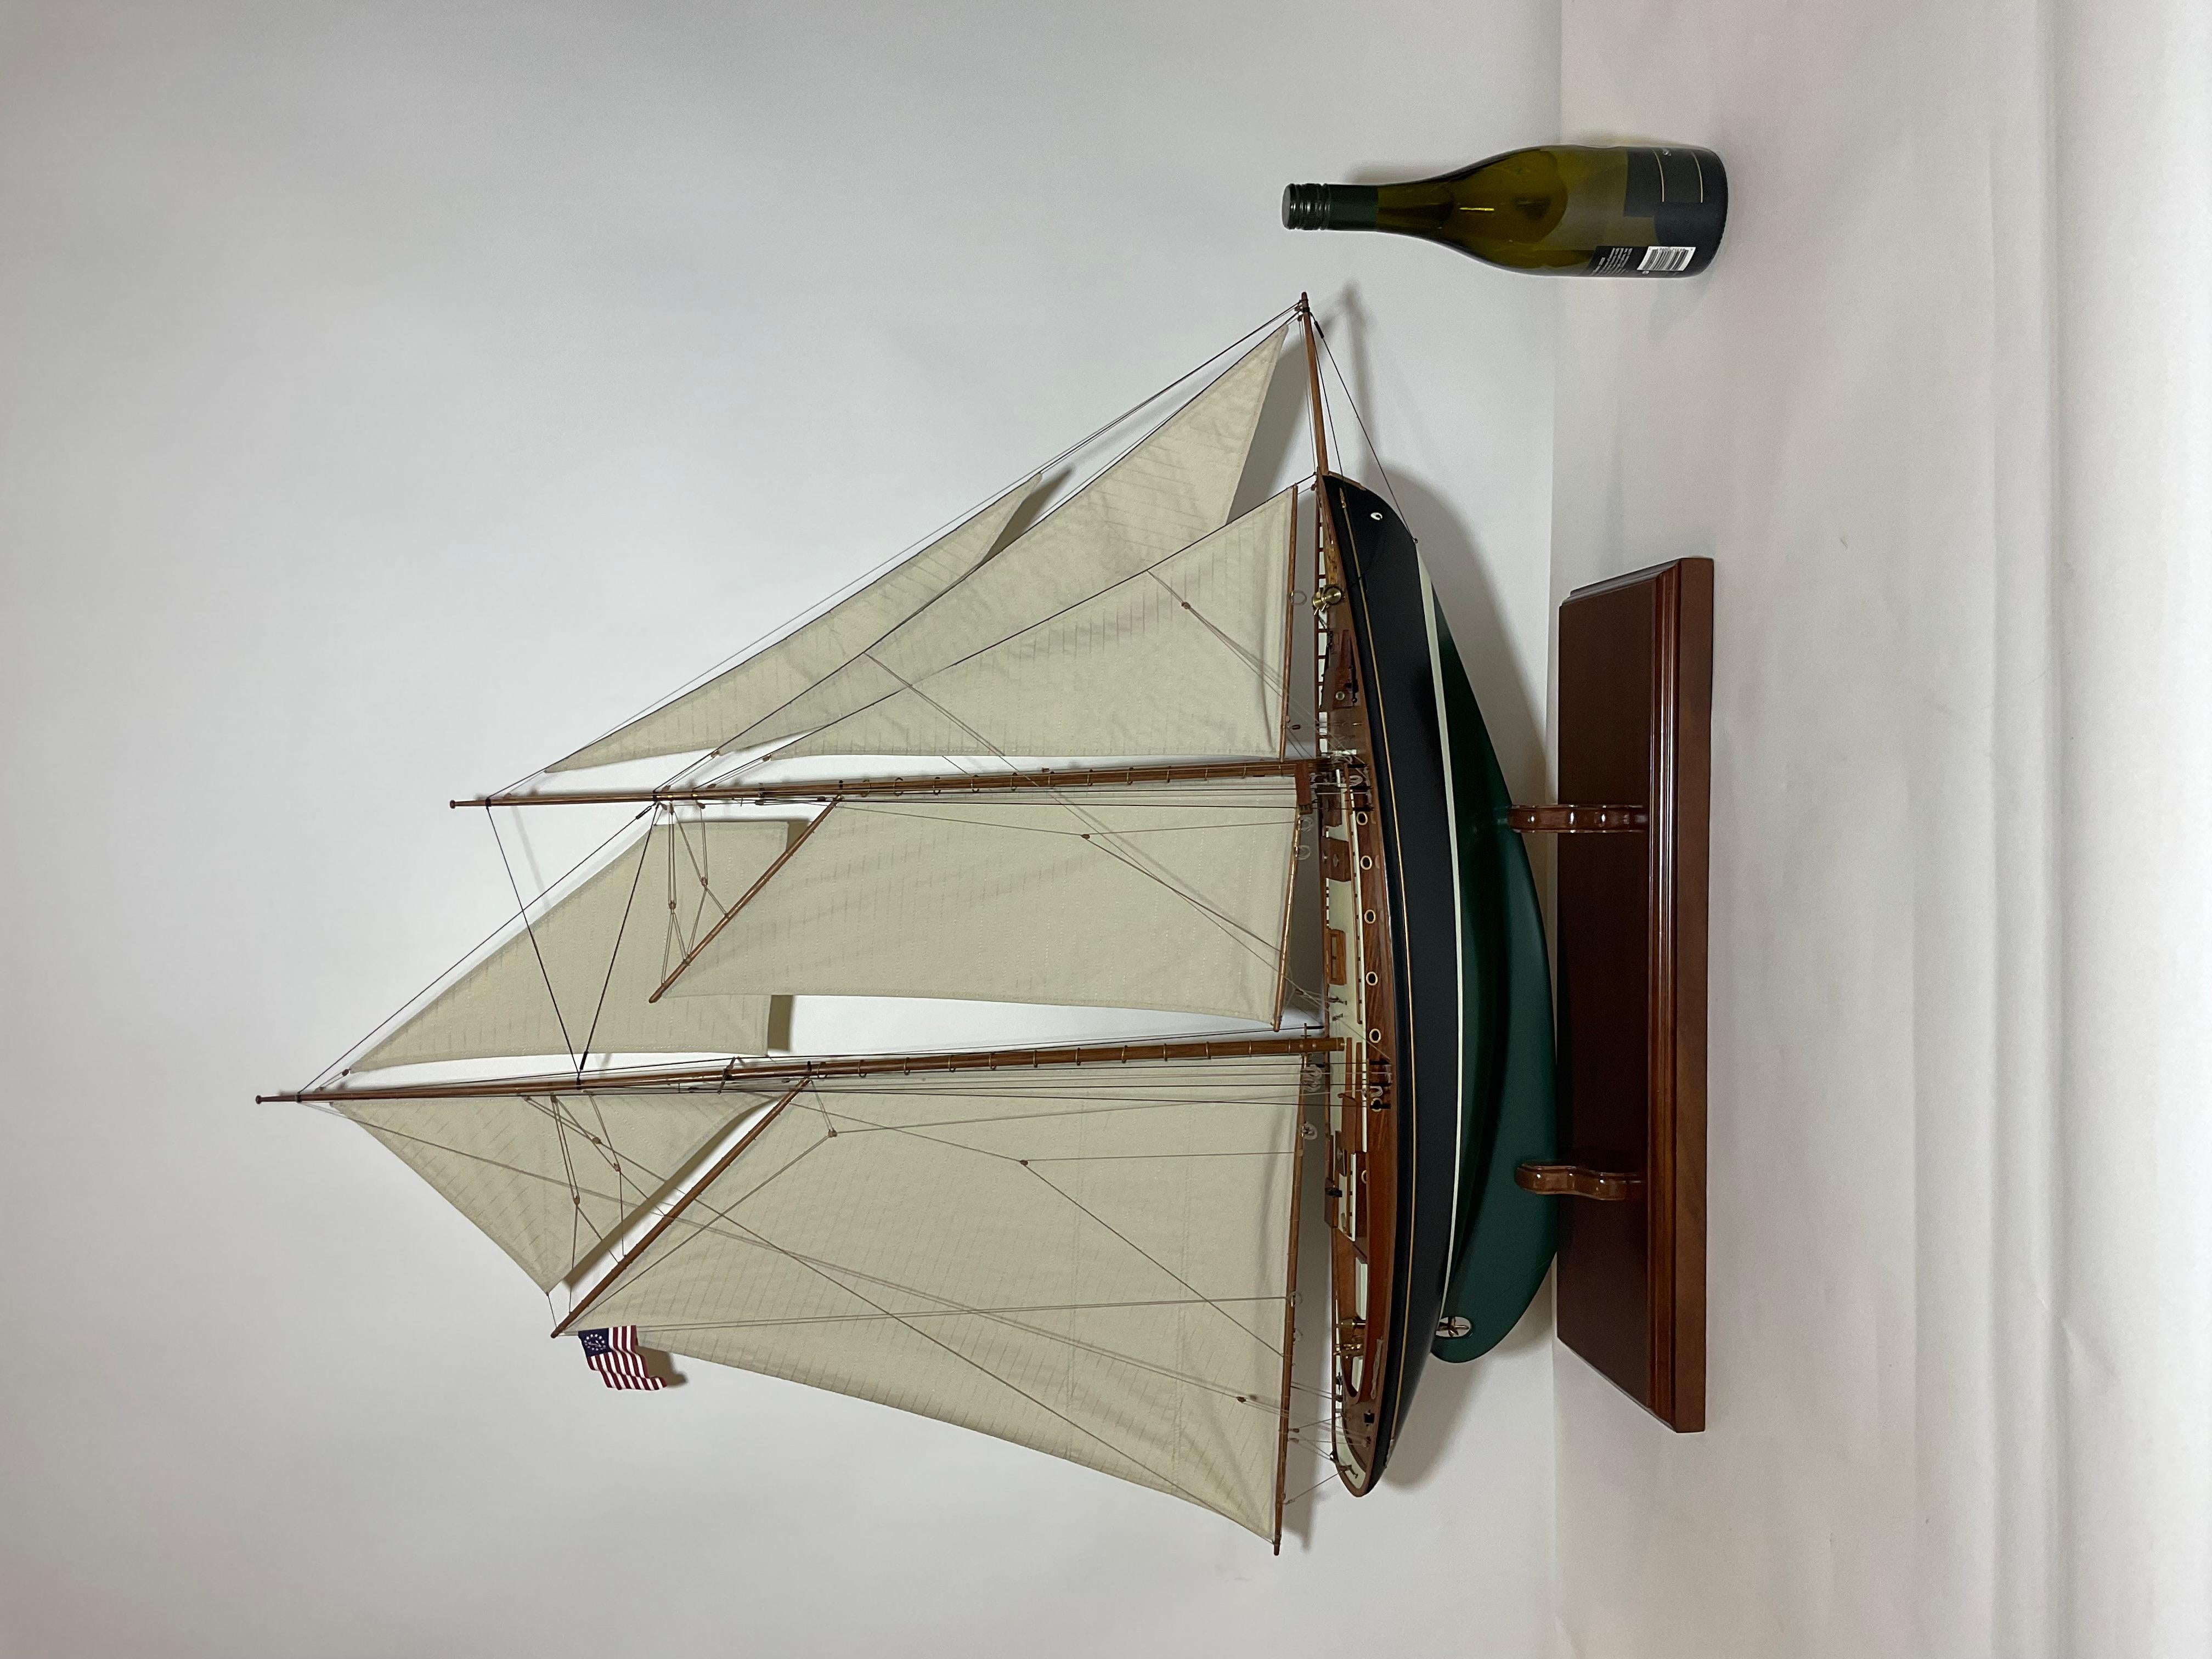 Exceptional model of the John Alden Designed. Schooner yacht Malabar X. Built by Hodgson in Boothbay Maine. With full suit of finely stitched sails. Planked deck, mahogany cabins, cockpit, skylights, etc..

Weight: 13 lbs.
Overall Dimensions: 39